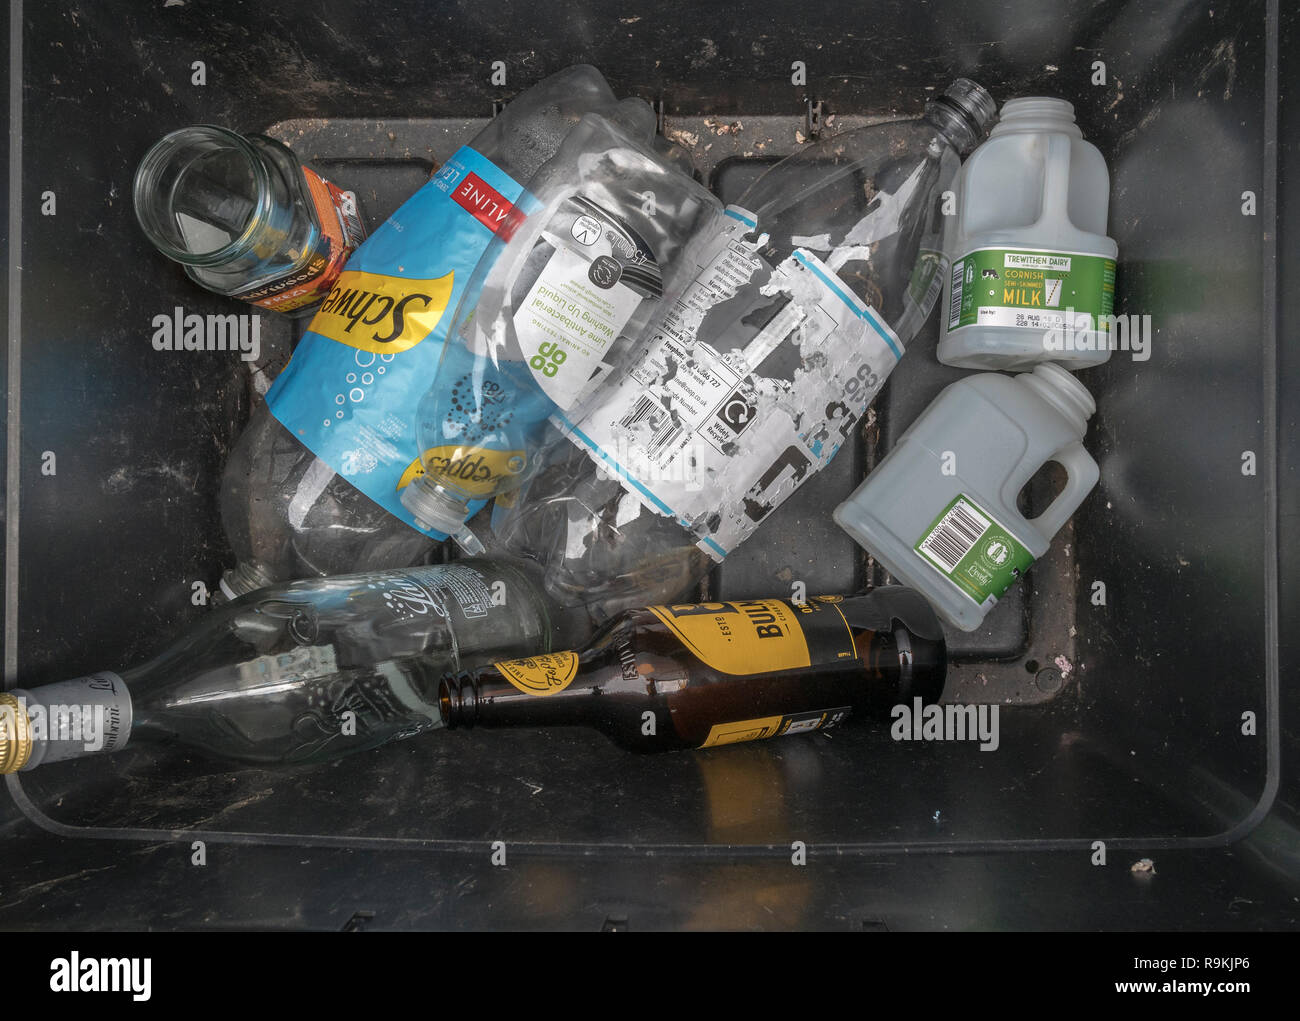 Domestic recycling box containing both plastic and glass bottles. Branded products so RM/Edit. Metaphor war on plastic, plastic recycling. Stock Photo